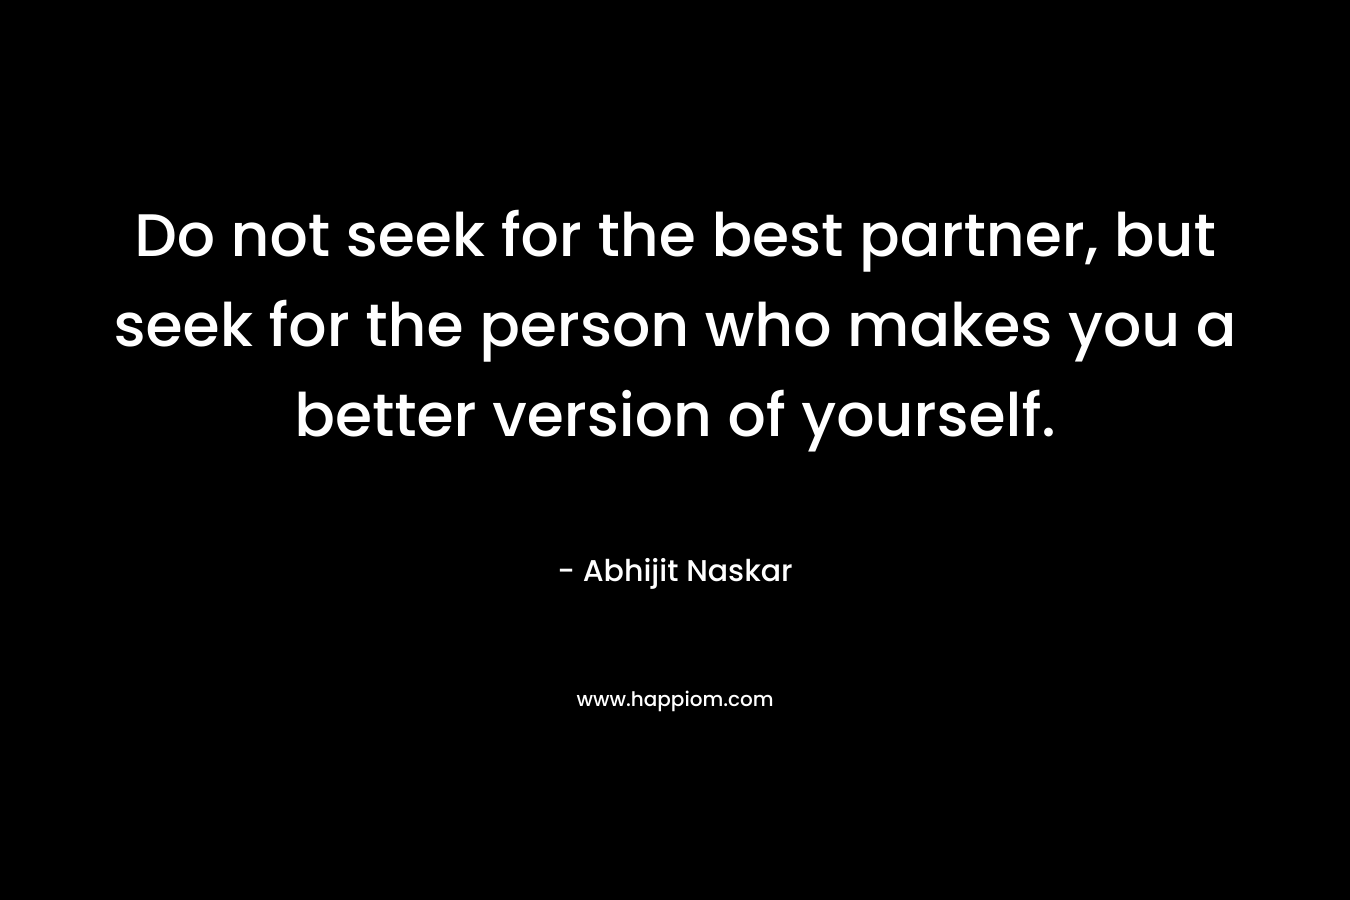 Do not seek for the best partner, but seek for the person who makes you a better version of yourself.